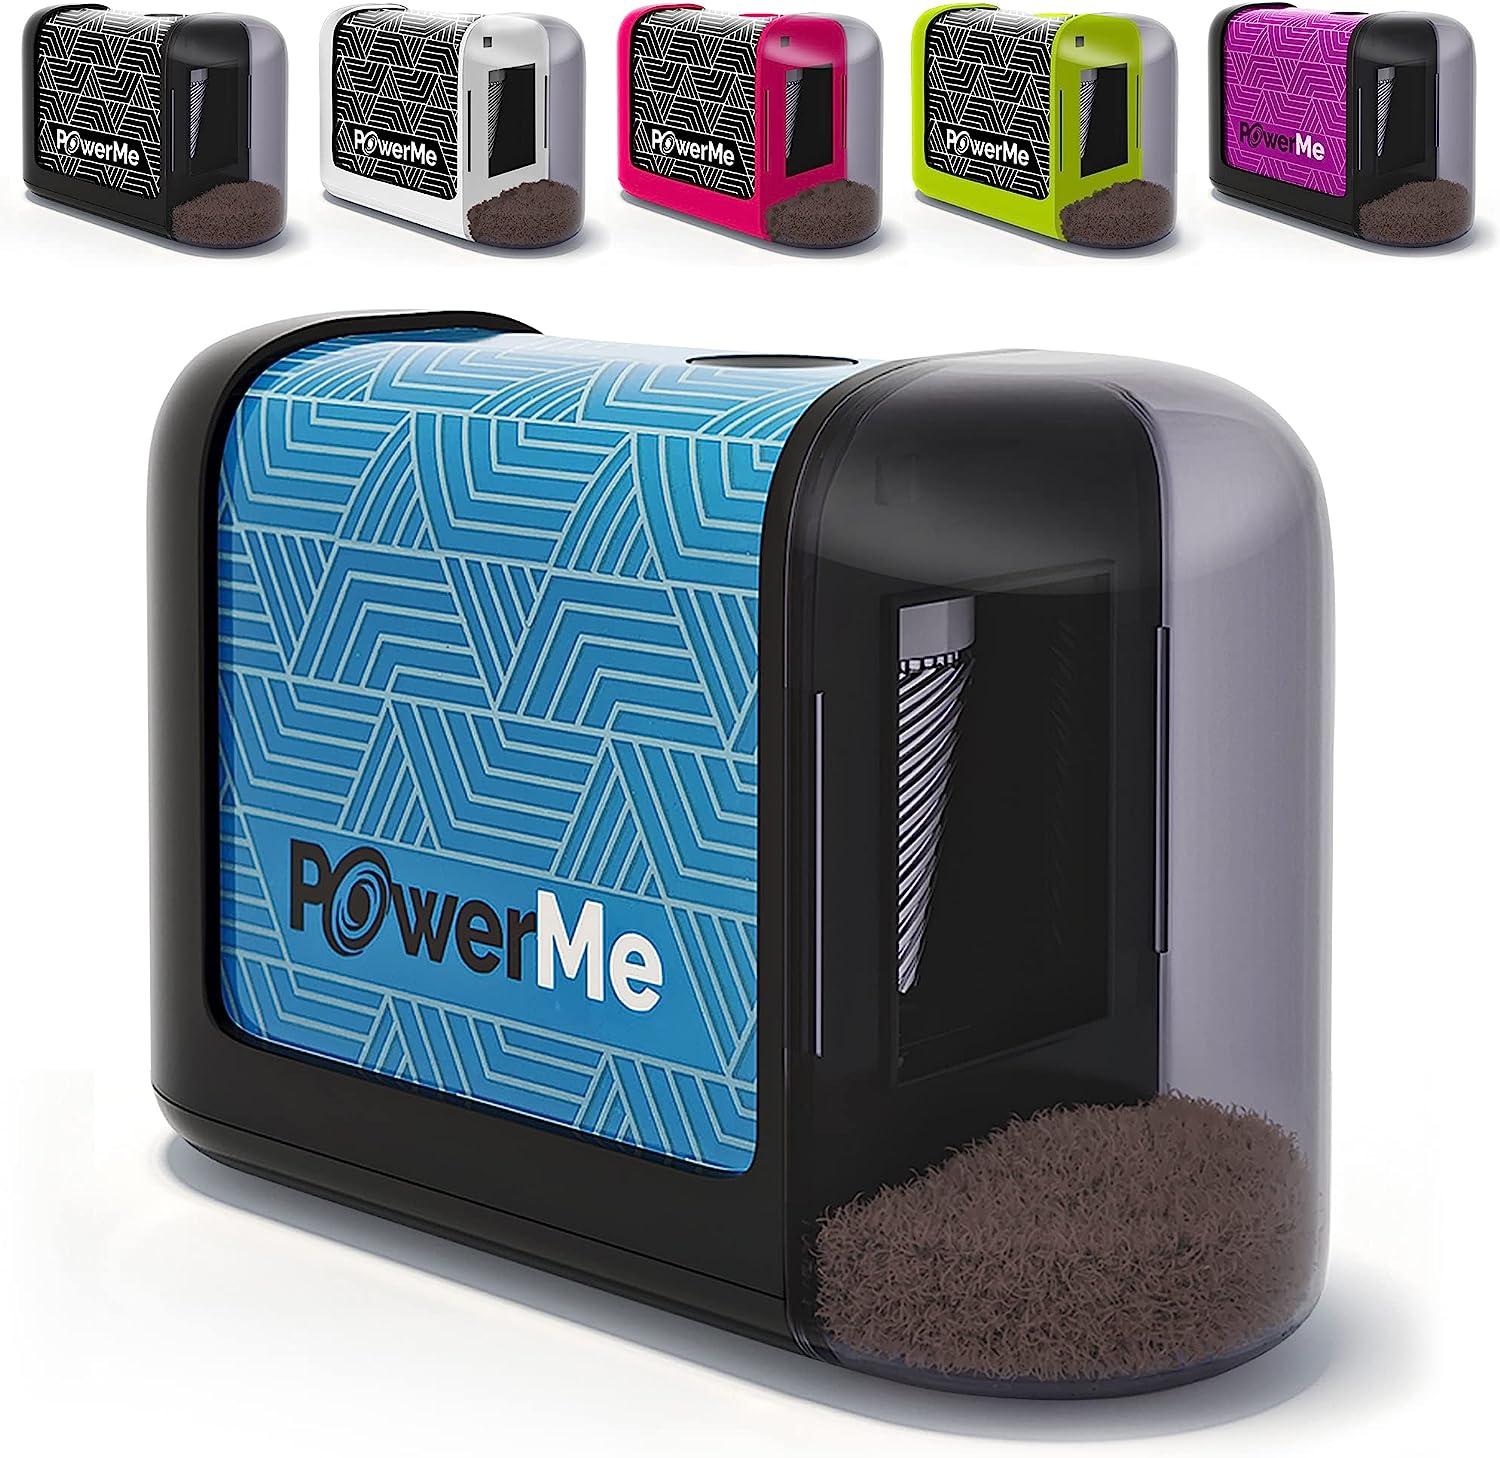 powerme electric pencil sharpener - battery operated for home office school artist students  powerme